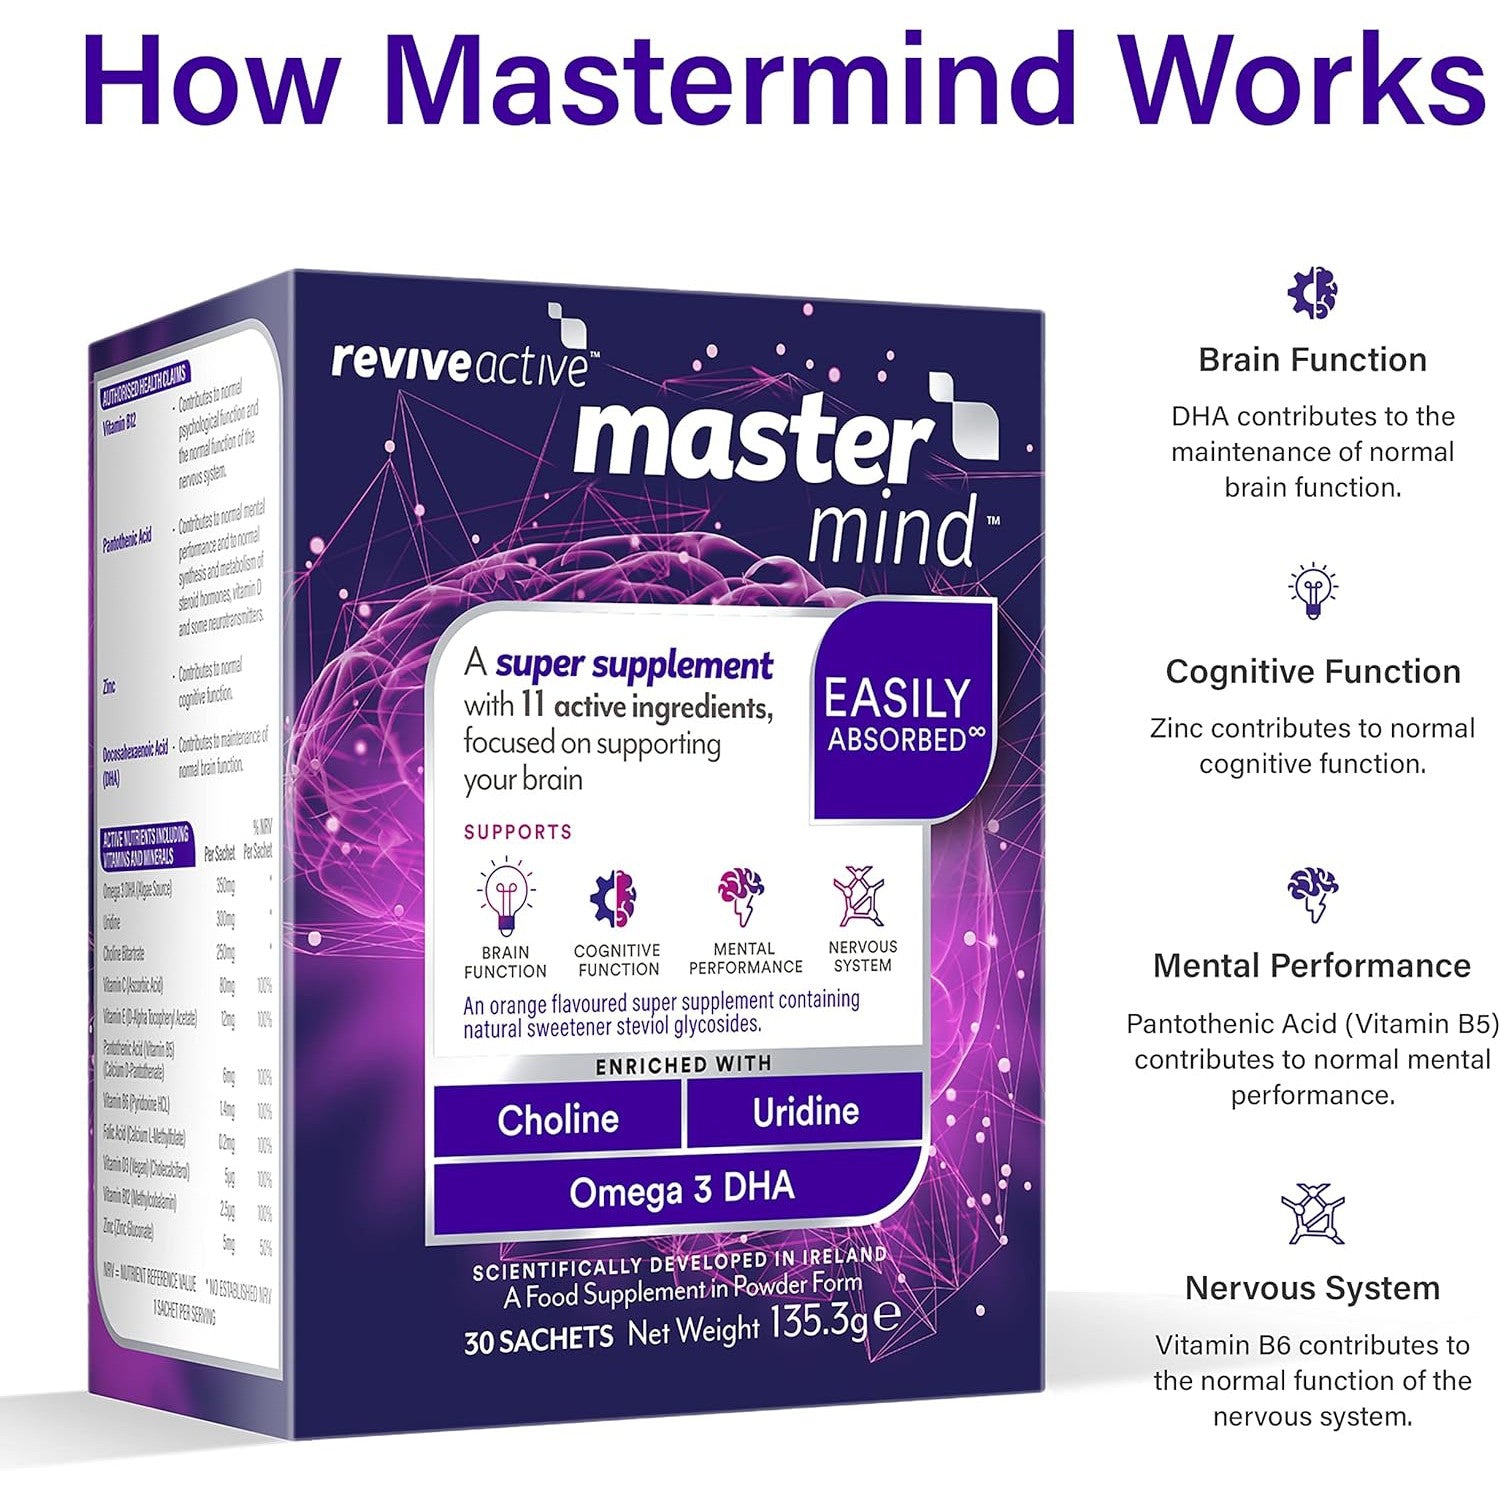 Revive Active Mastermind Memory & Focus Super Supplement 30 day pack